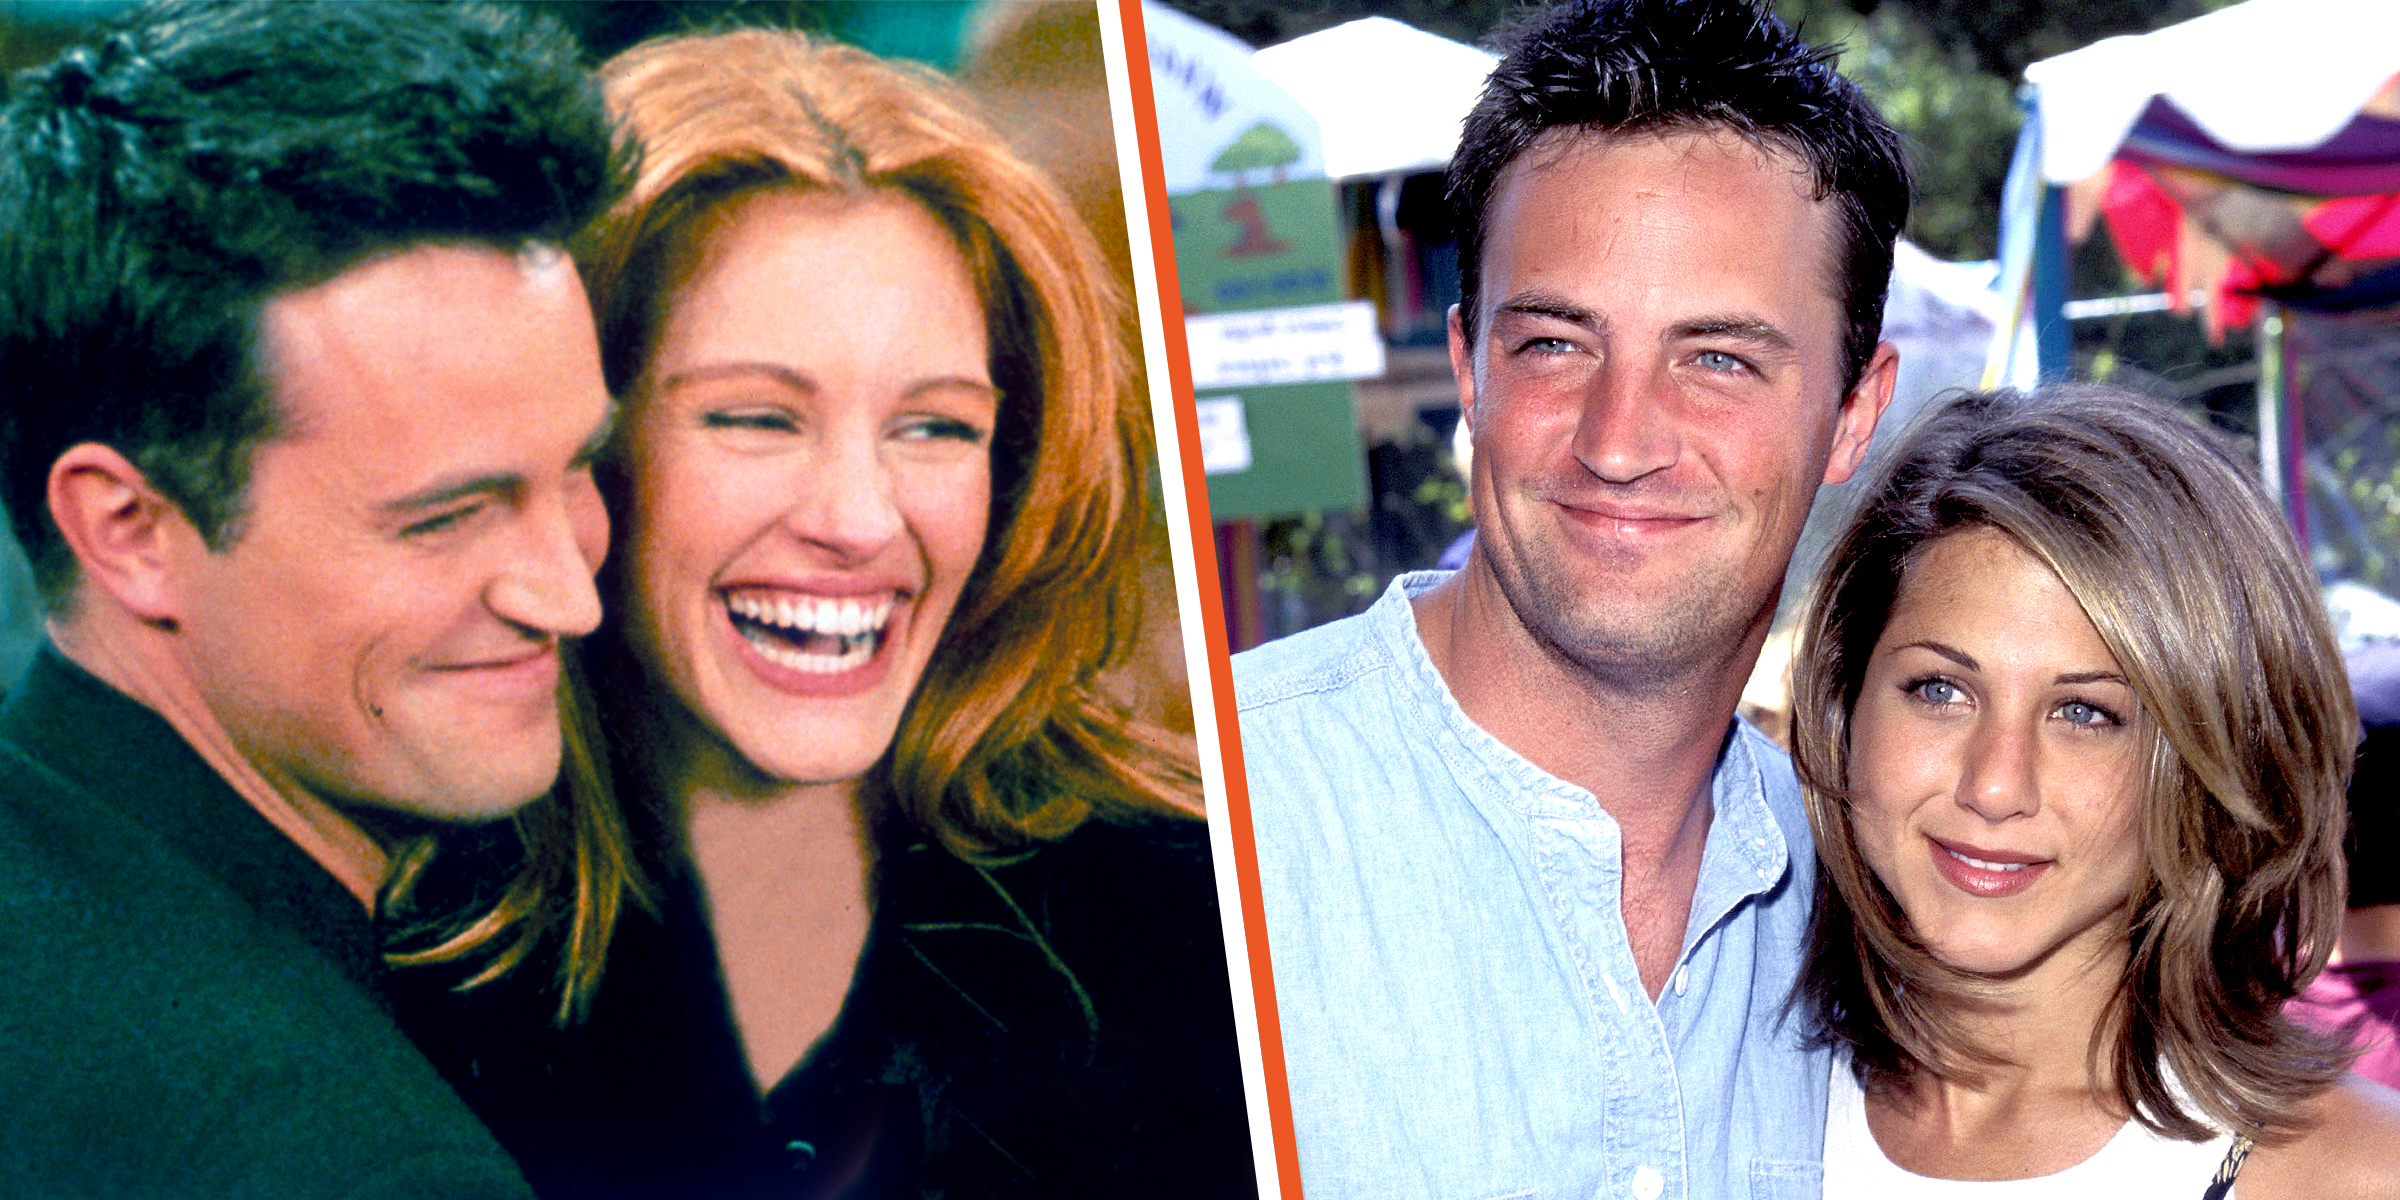 Matthew Perry and Julia Roberts | Matthew Perry and Jennifer Aniston | Source: Getty Images